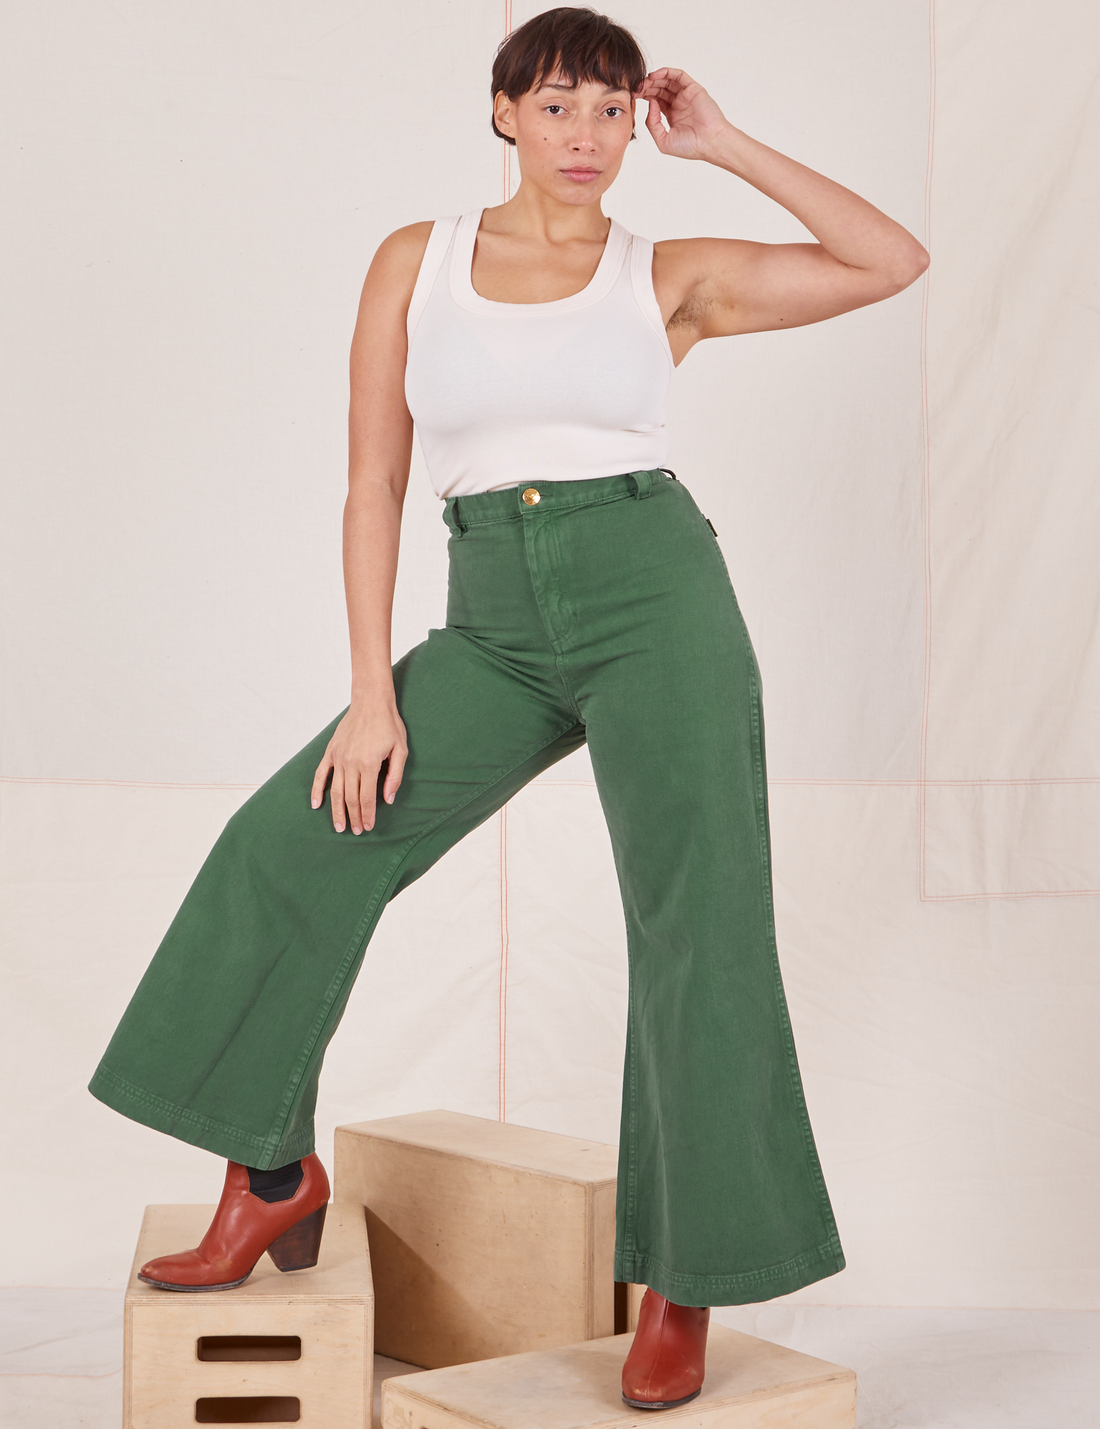 Tiara is 5'4" and wearing XS Bell Bottoms in Dark Emerald Green paired with vintage off-white Tank Top